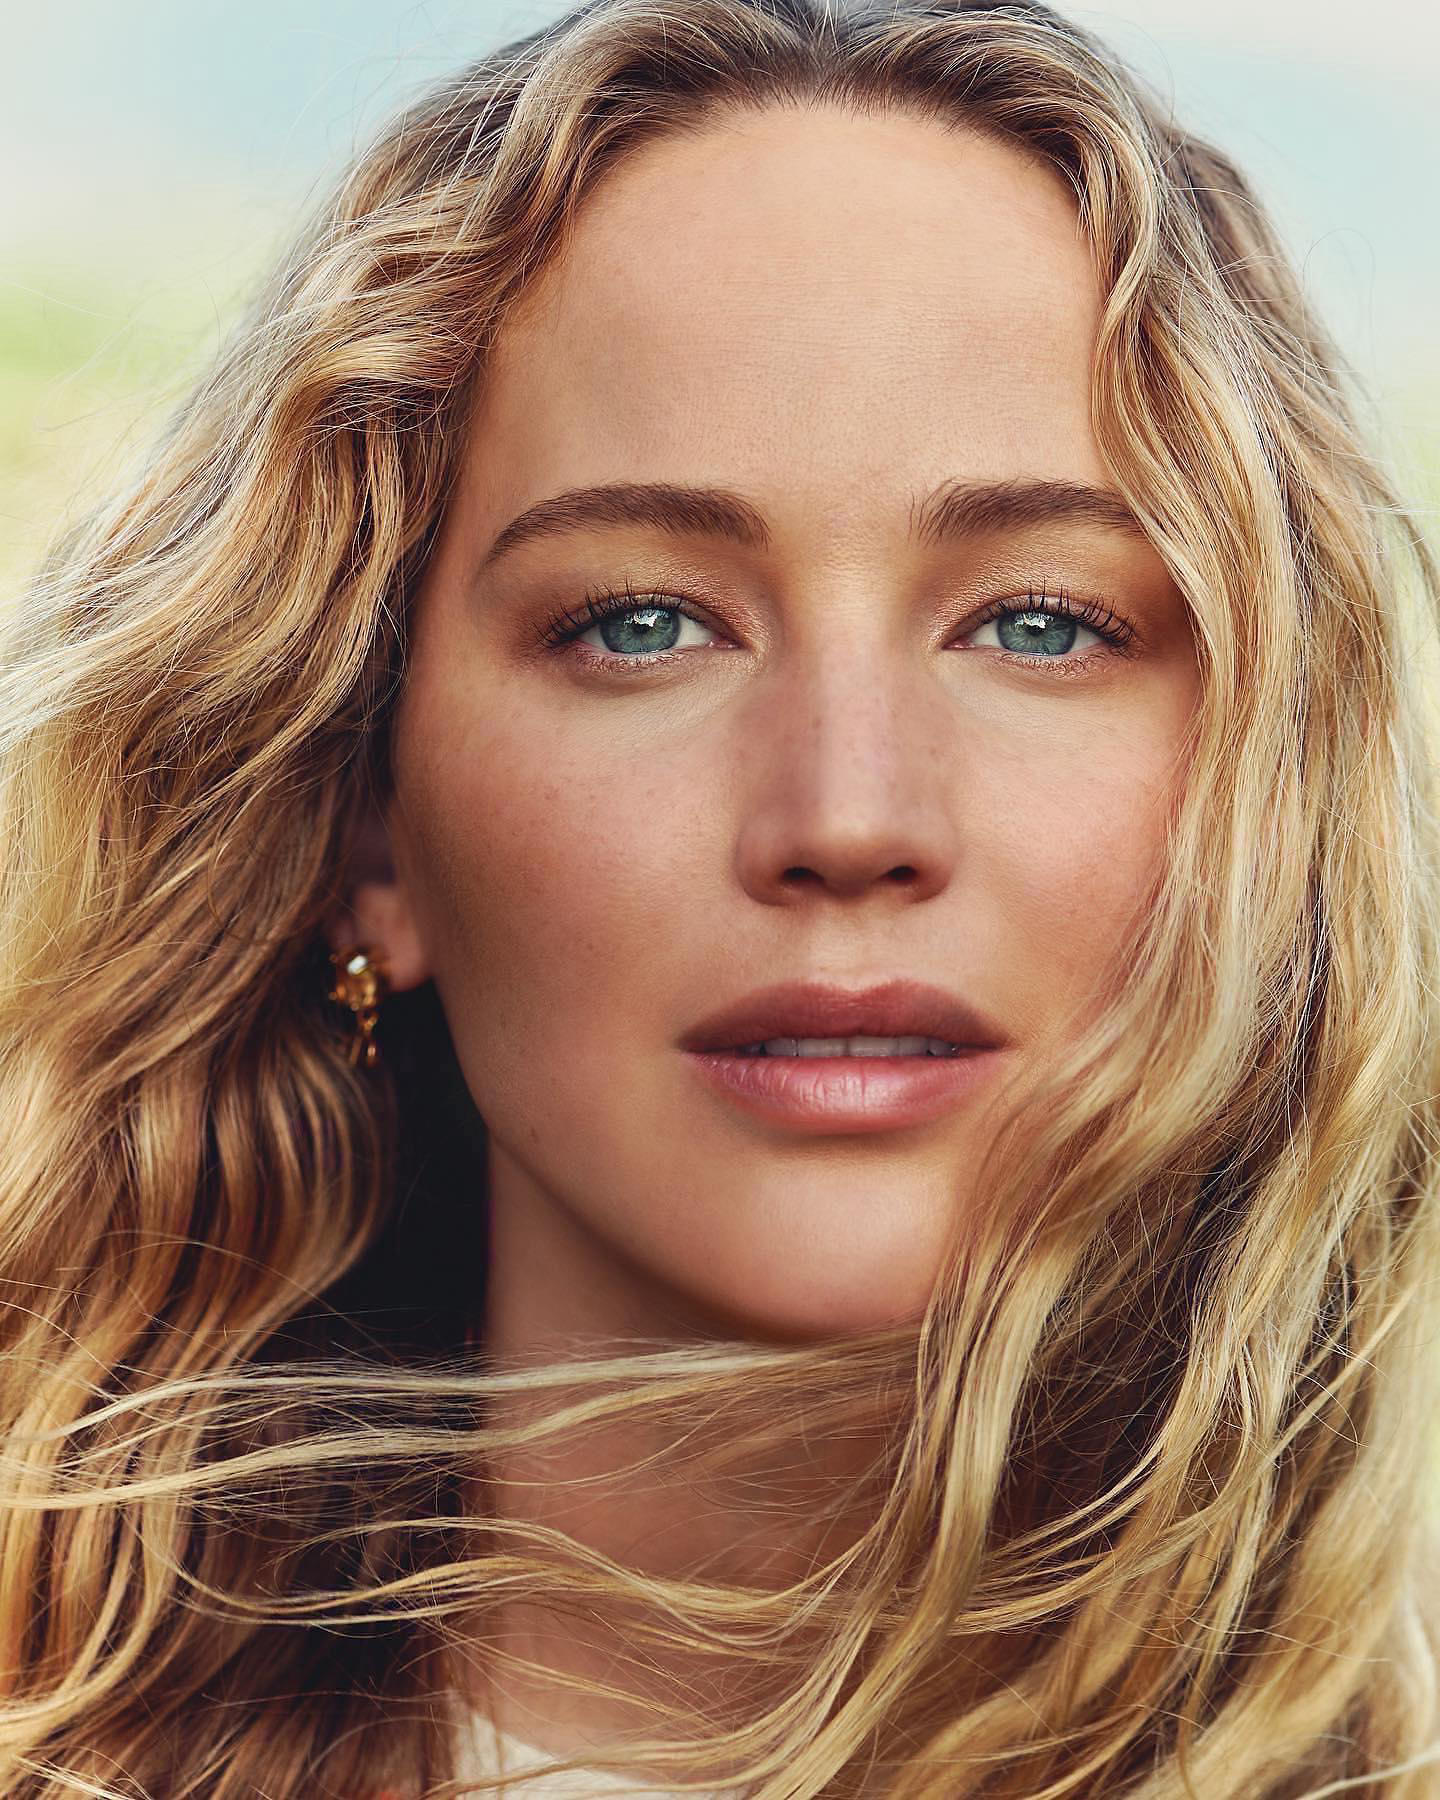 Dior Official - You too can be just as relaxed, refreshed and renewed as #JenniferLawrence after a t